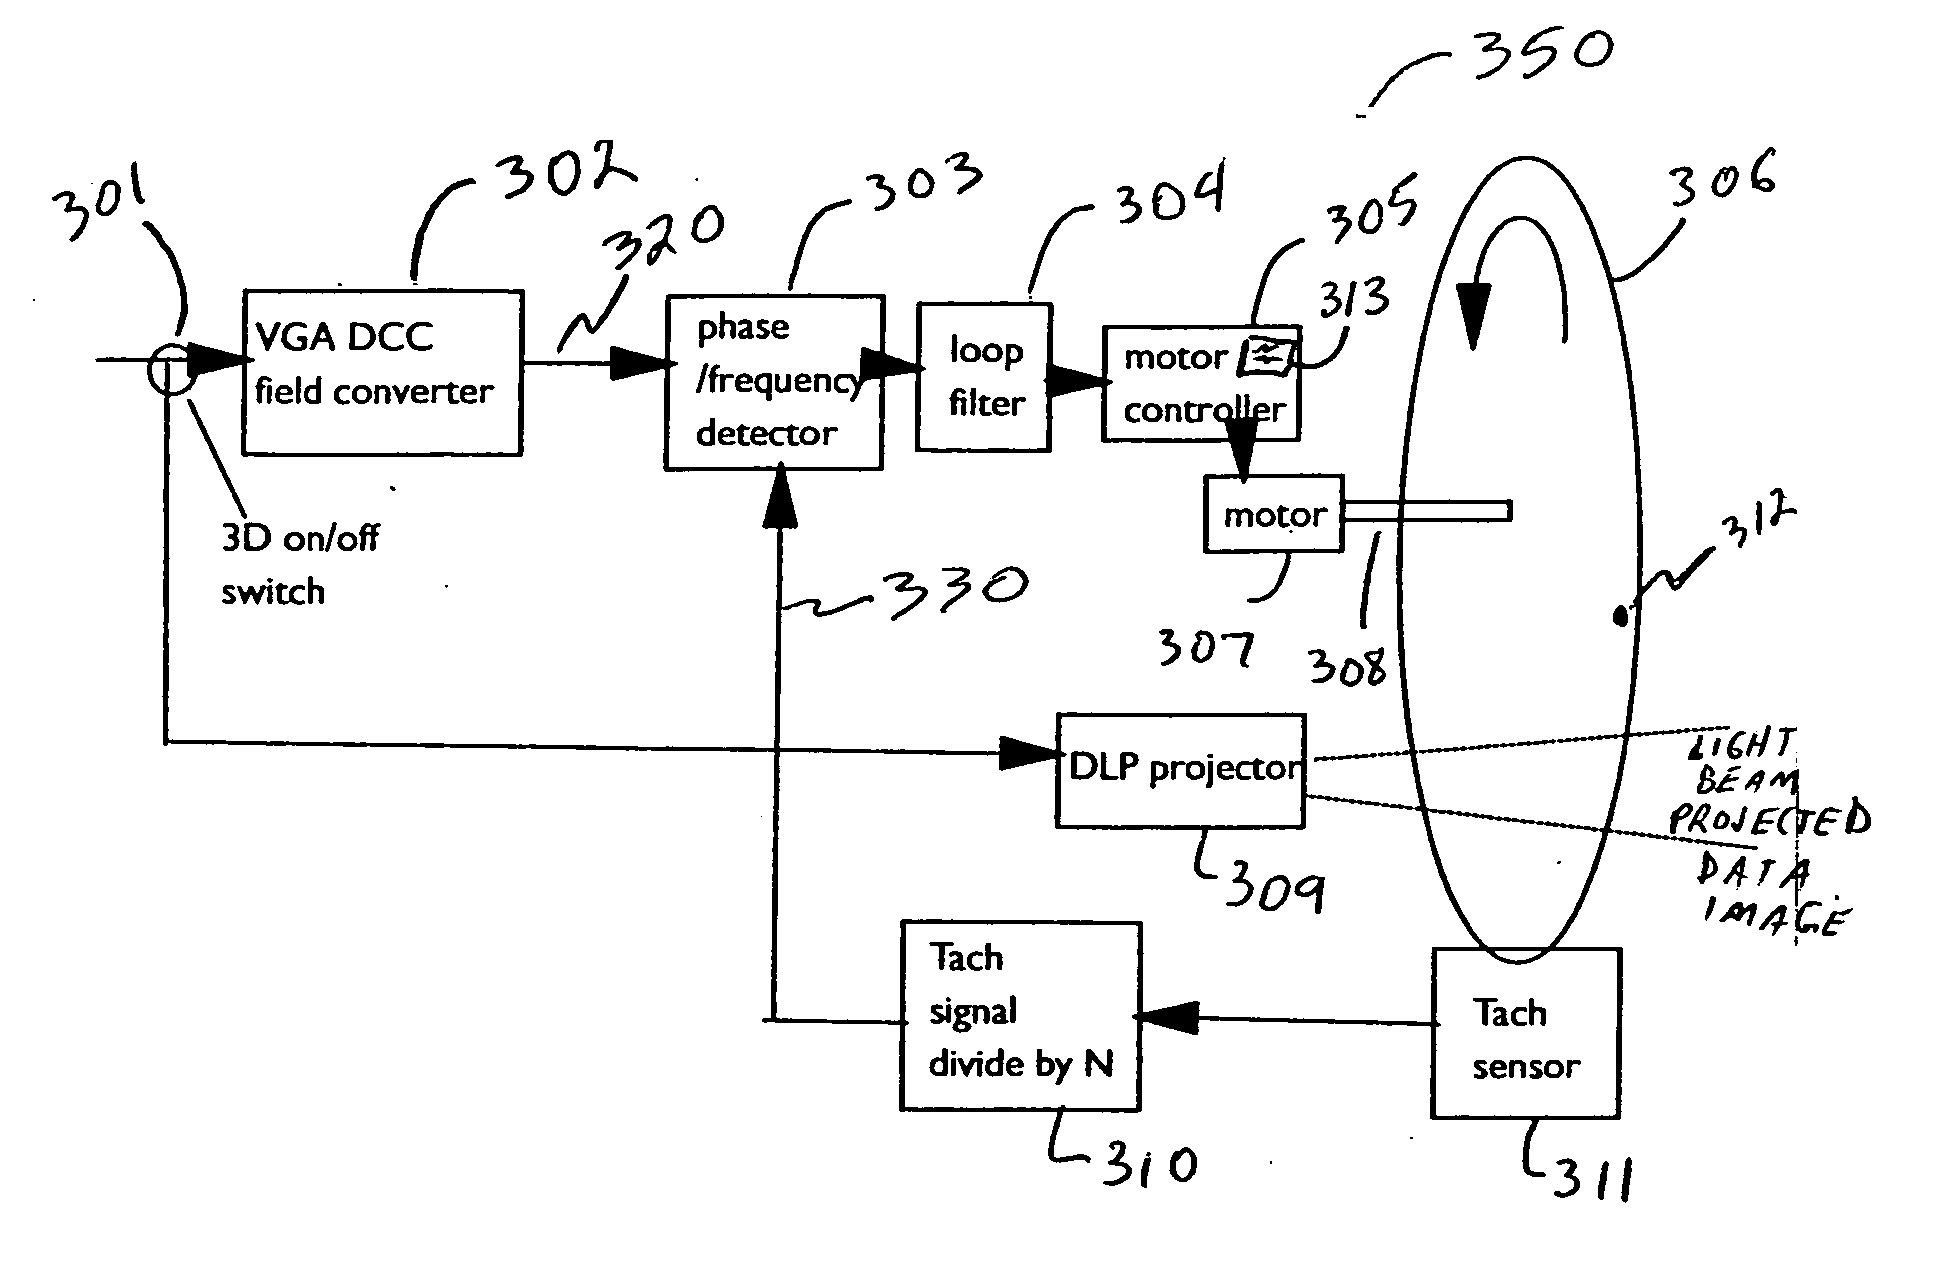 Method to synchronize stereographic hardware to sequential color rendering apparatus